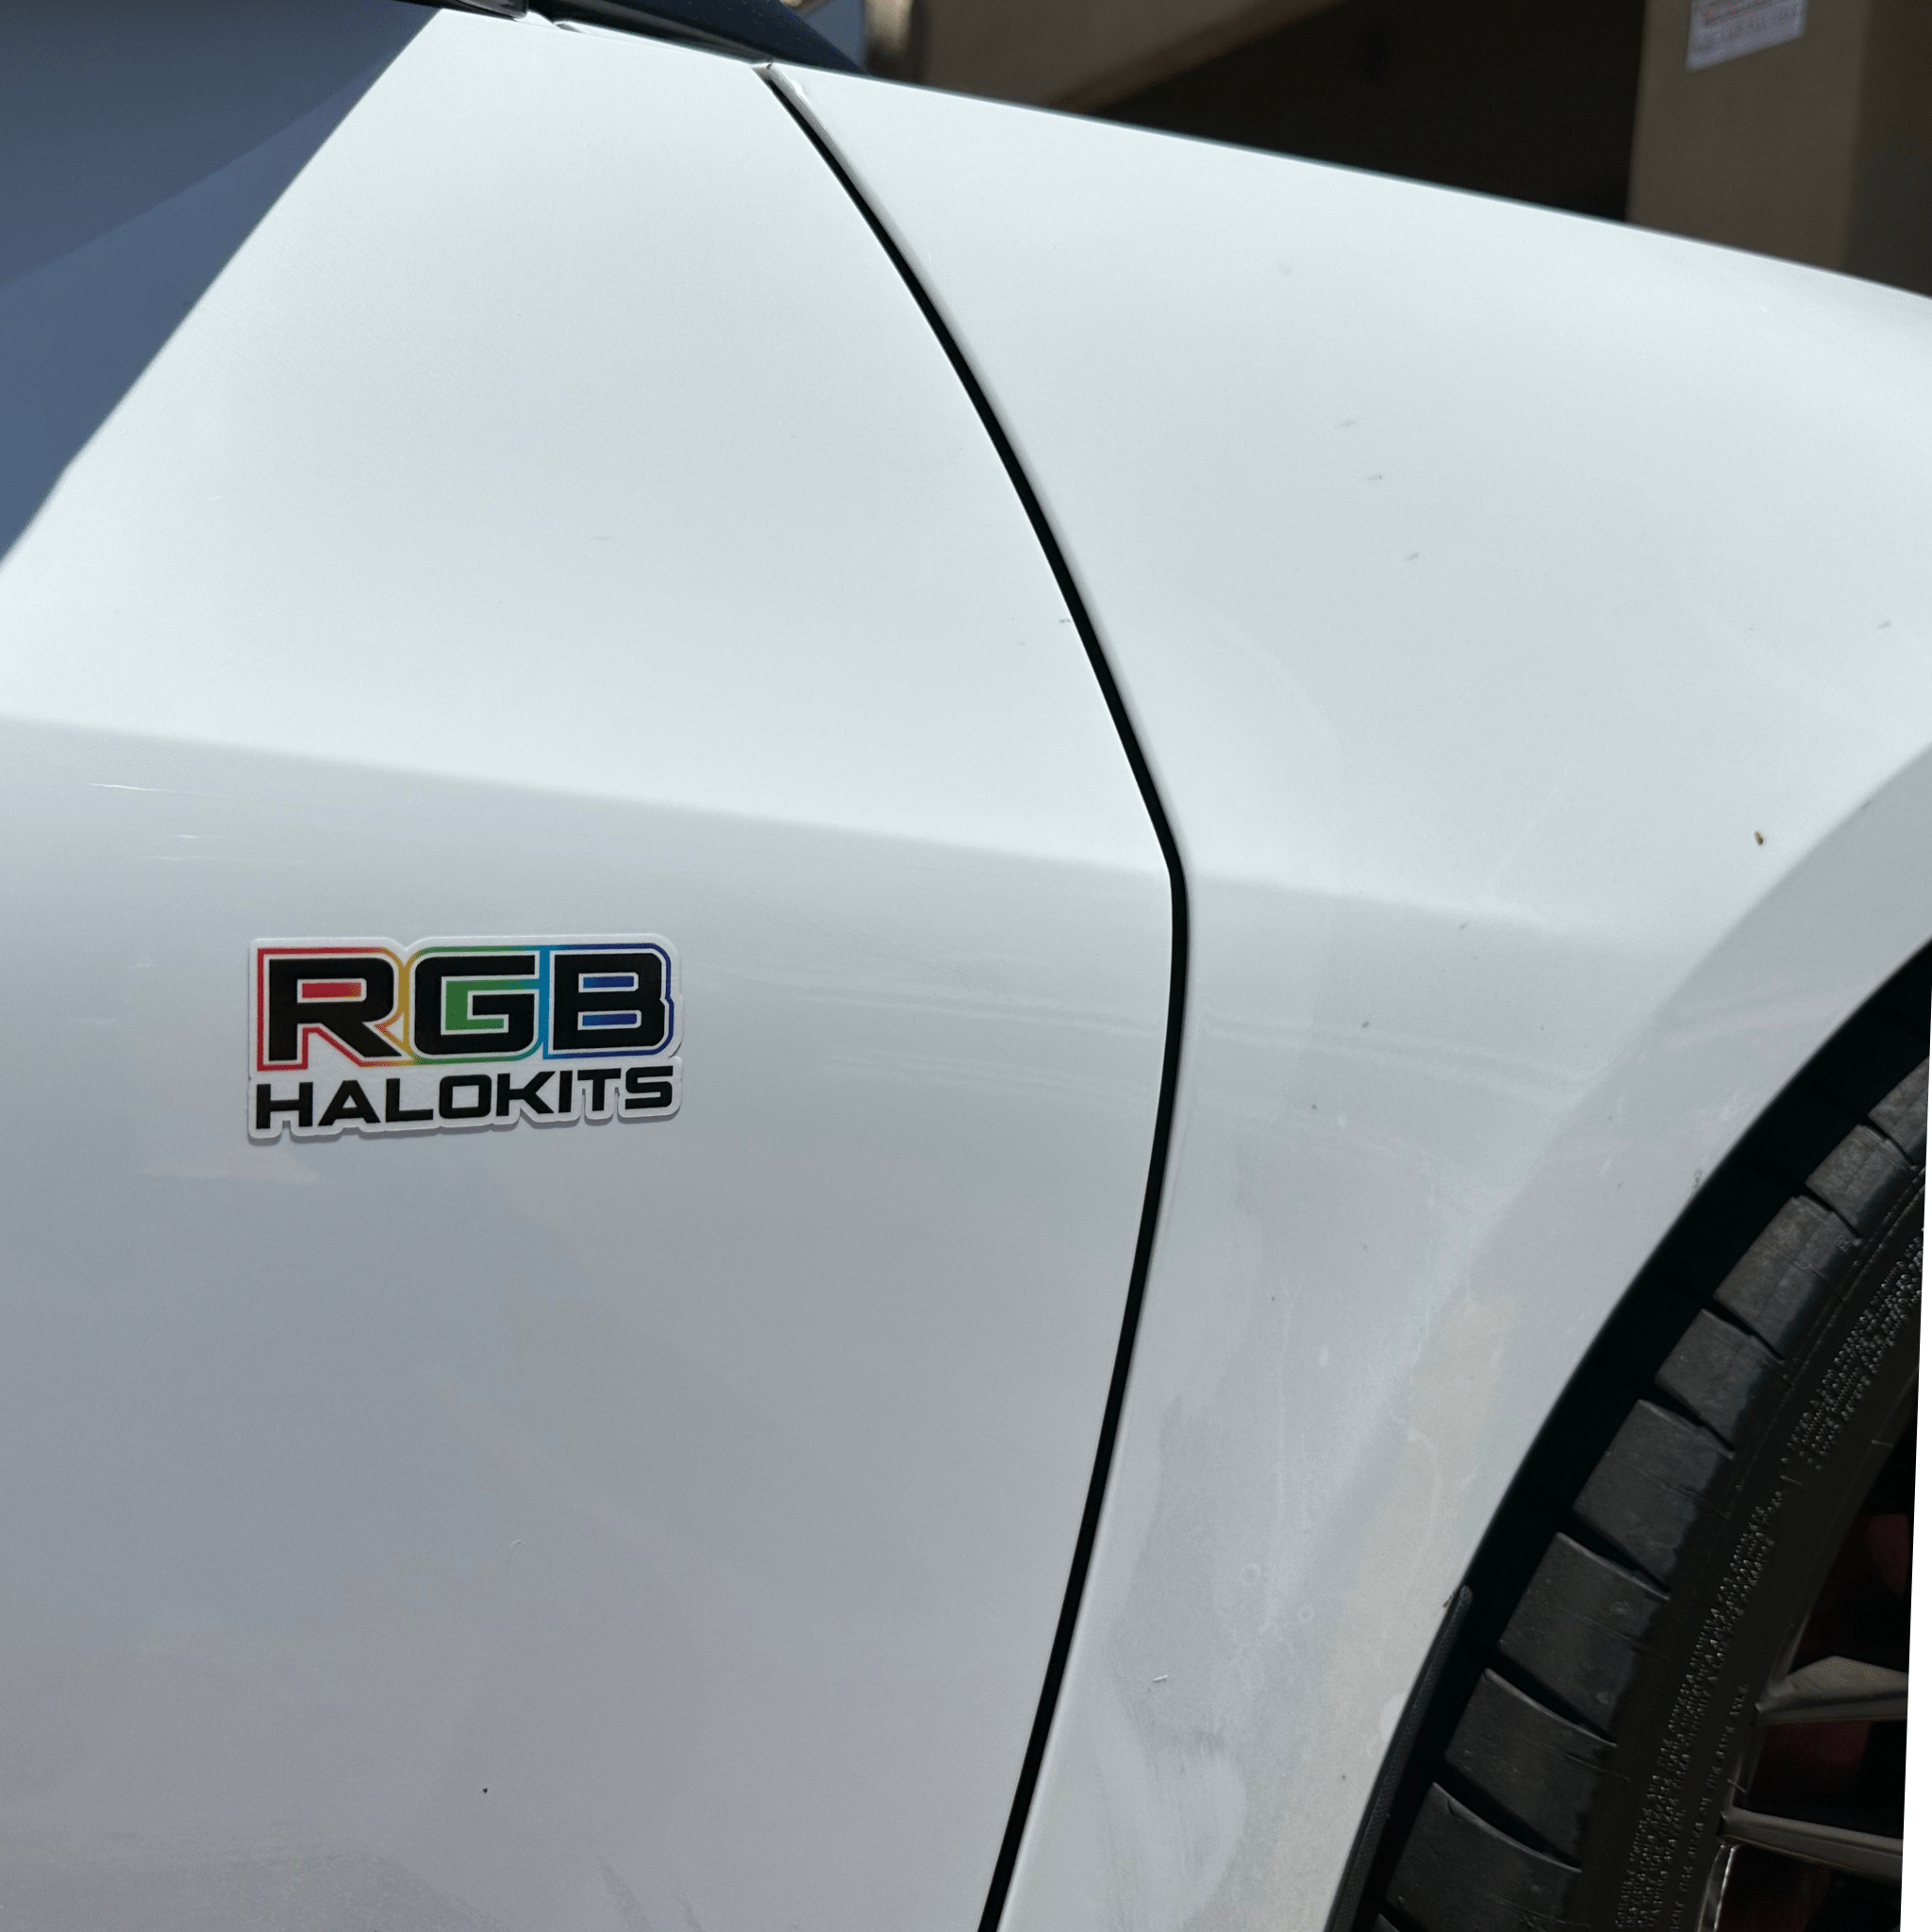 Decals / Stickers - RGB Halo Kits Multicolor Flow Series Color Chasing RGBWA LED headlight kit Oracle Lighting Trendz OneUpLighting Morimoto theretrofitsource AutoLEDTech Diode Dynamics